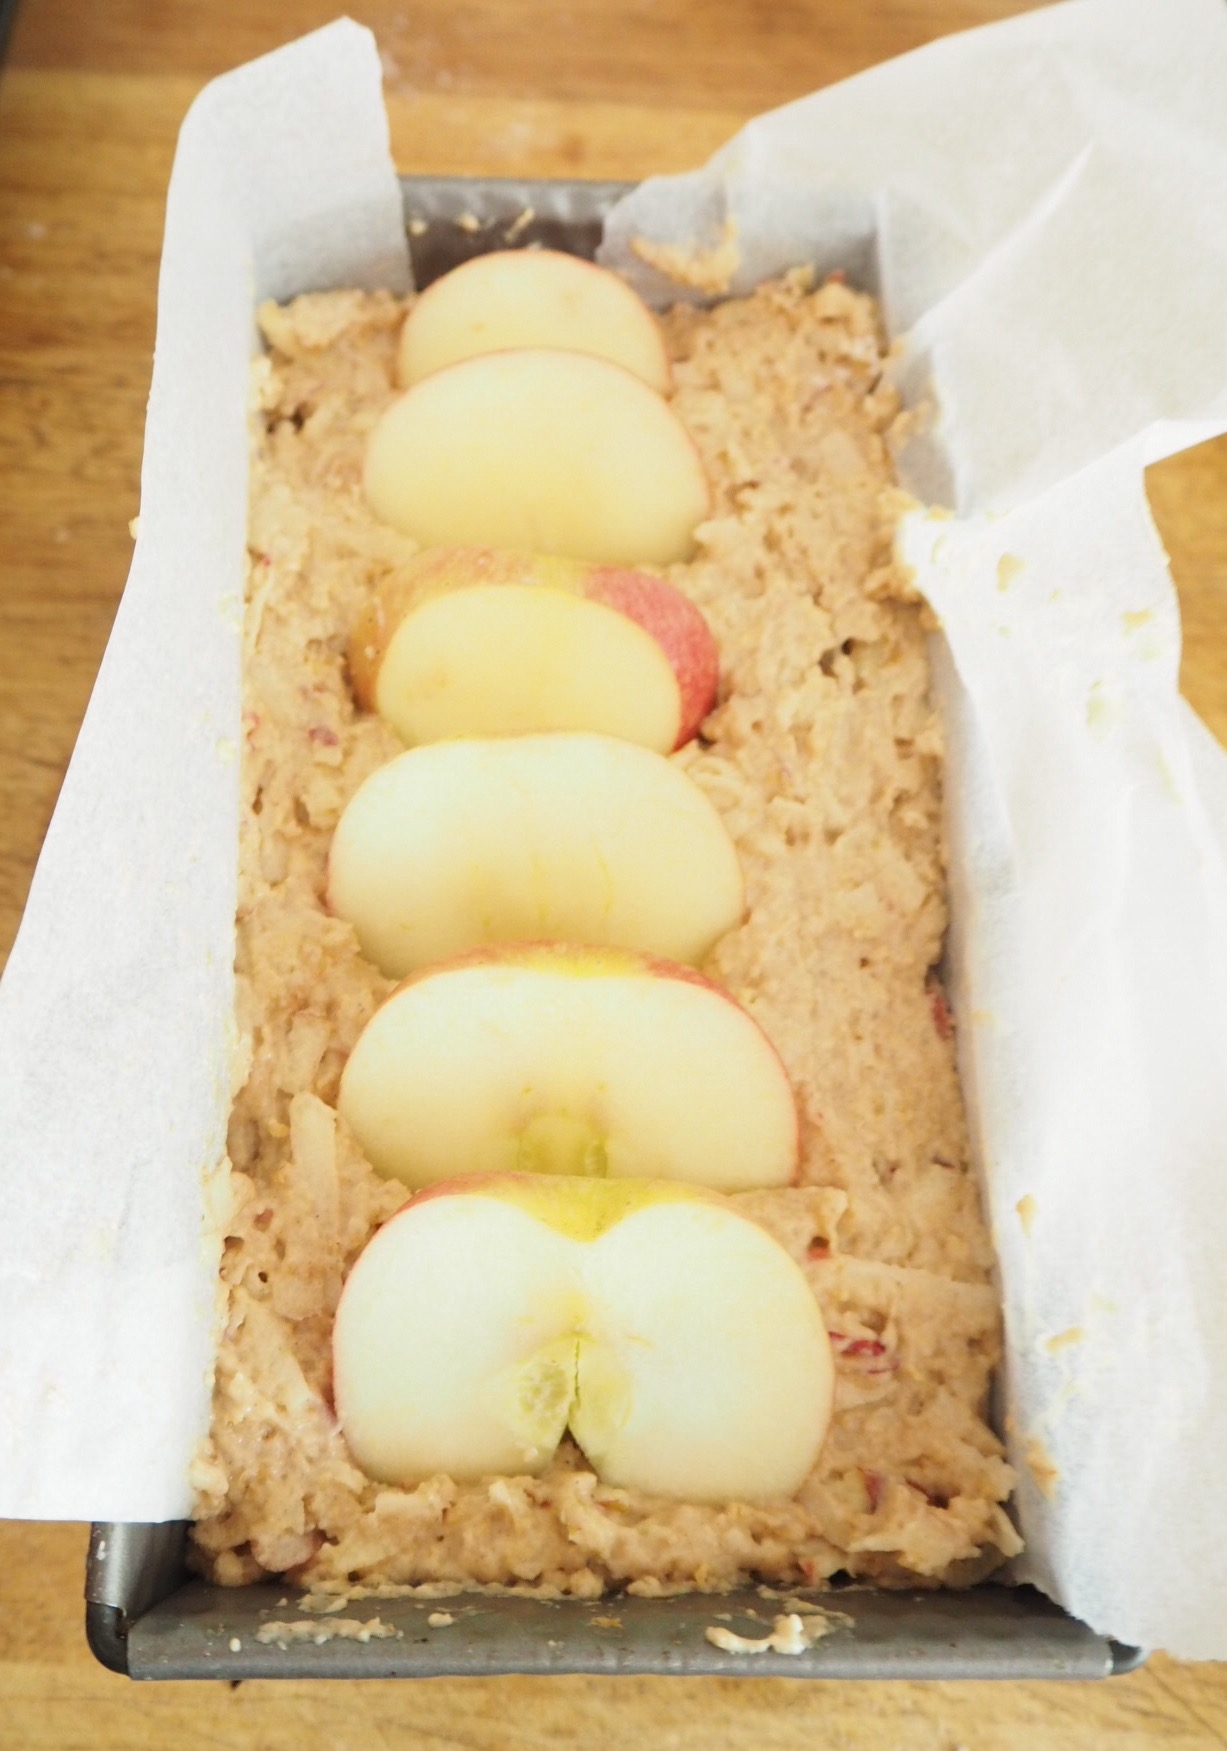 Healthy Apple and Cinnamon Loaf